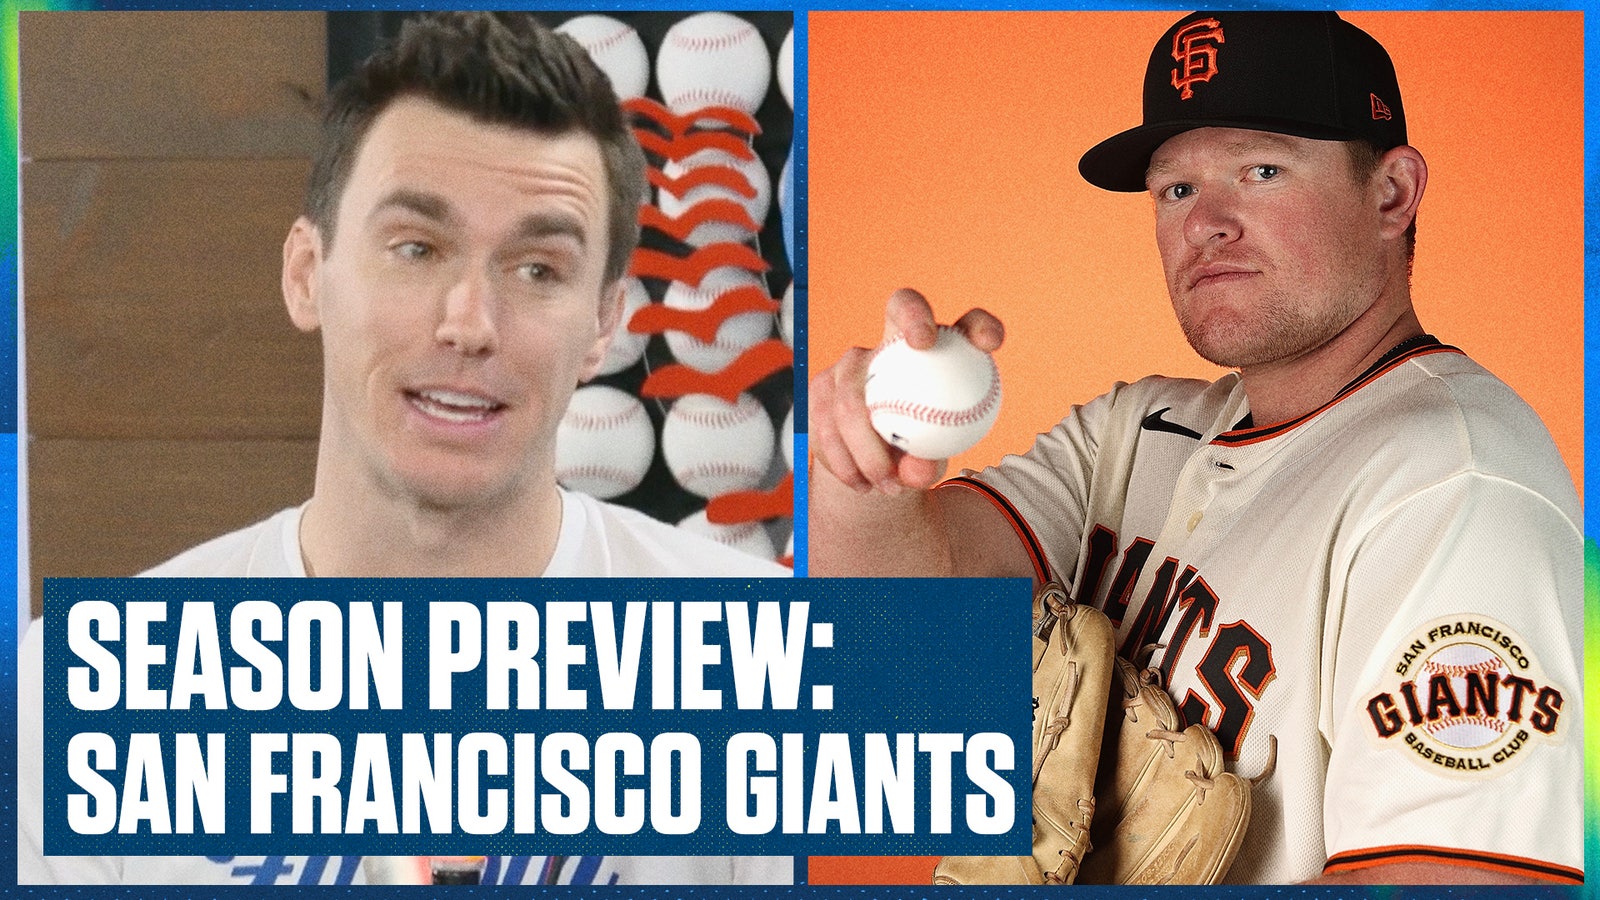 Giants season preview: Can the lineup stay healthy enough?